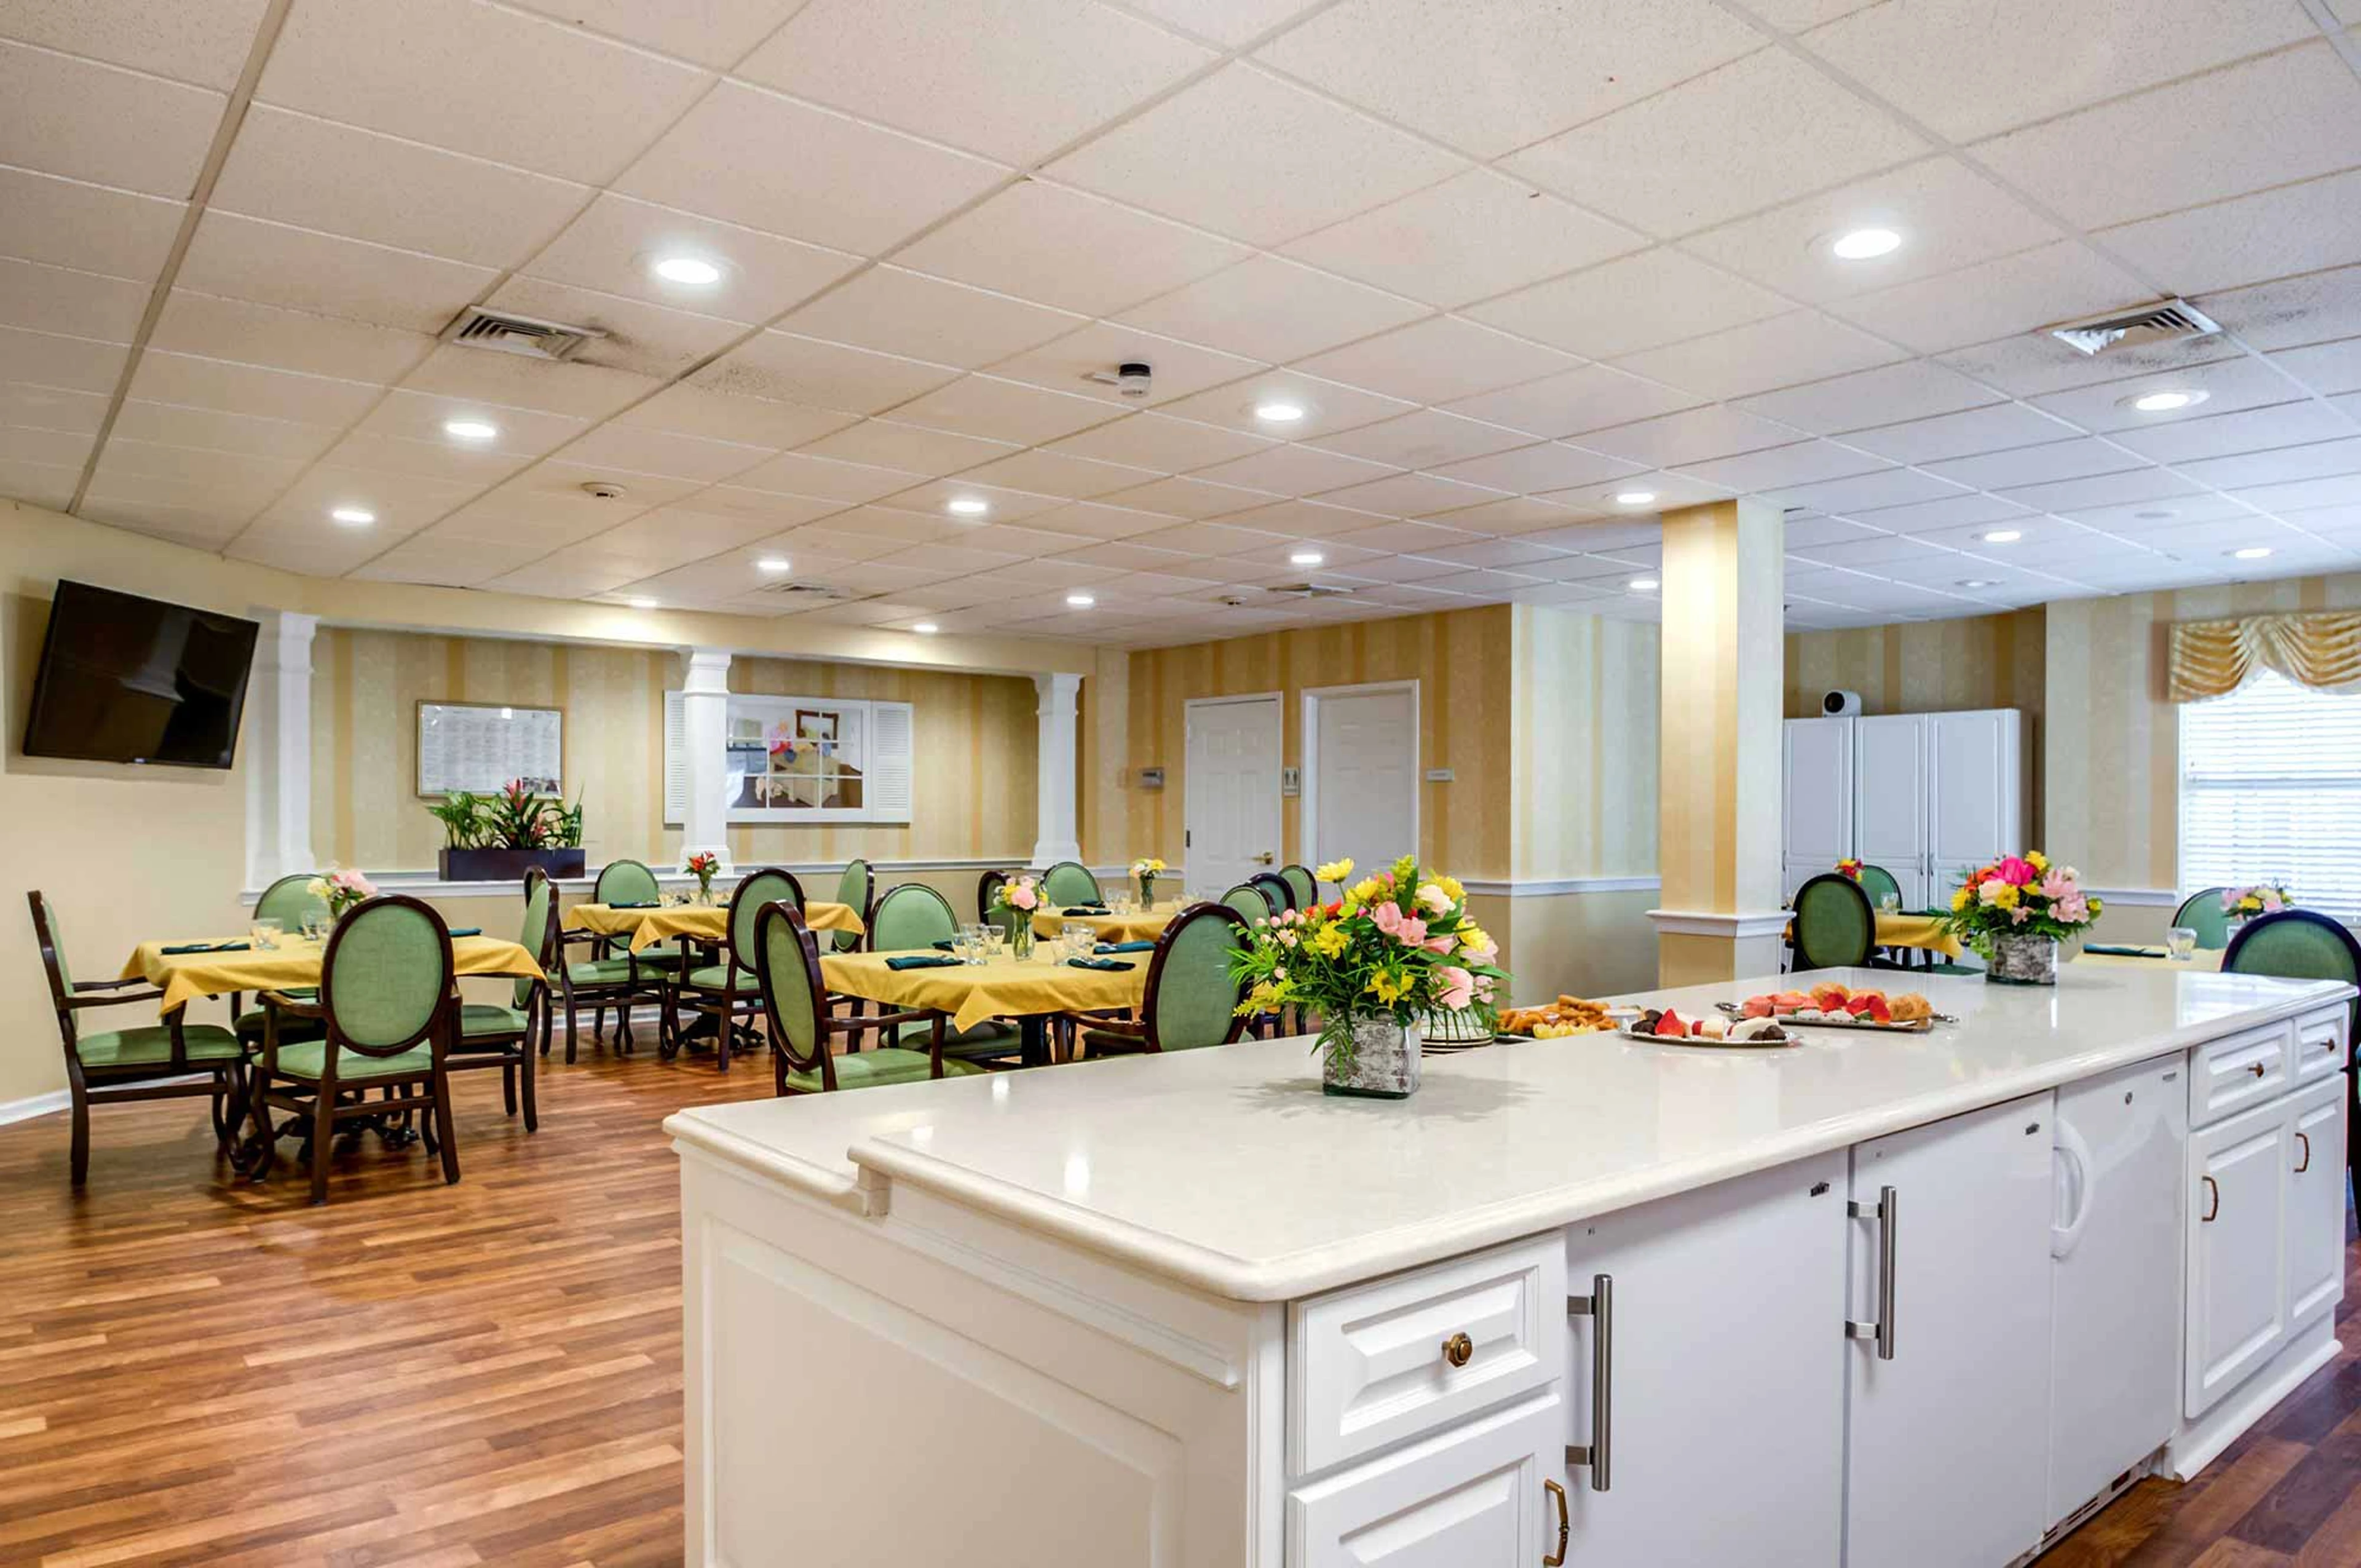 Middlebrook dining area kitchen